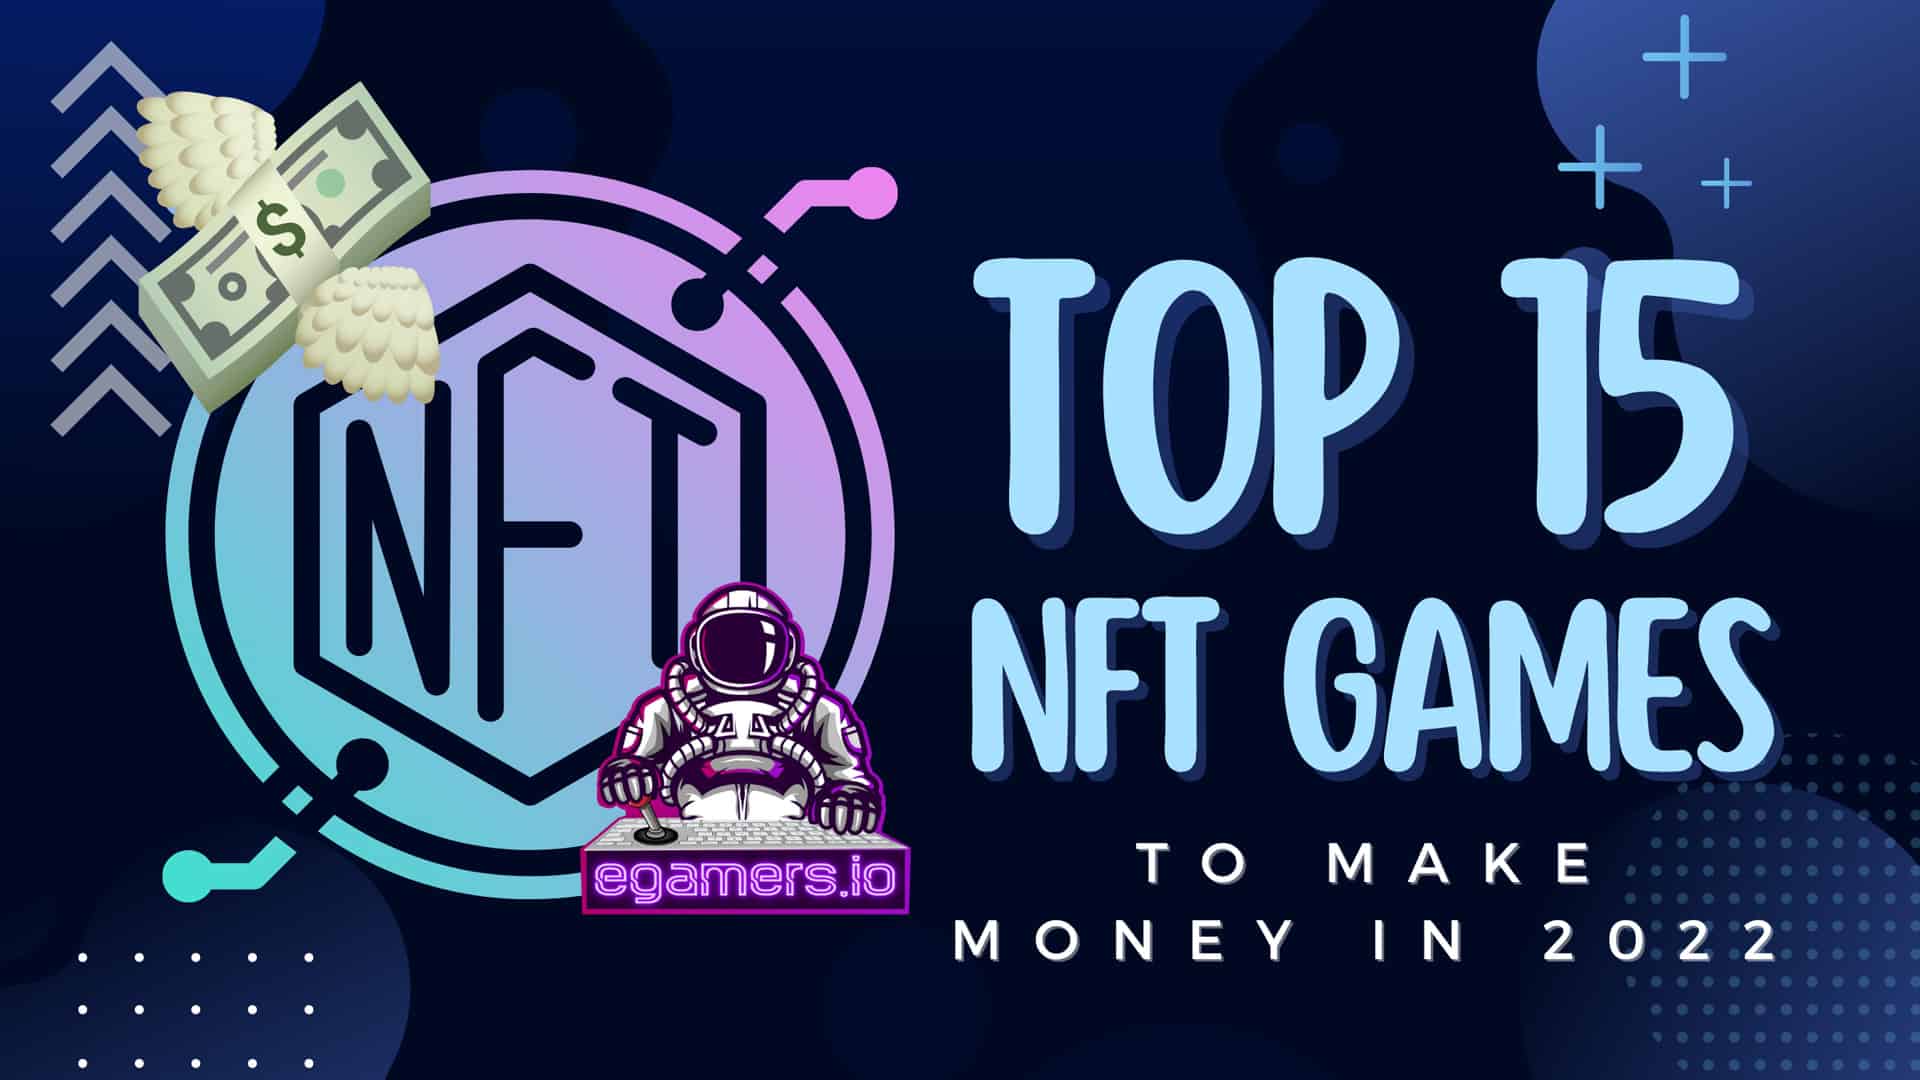 15 Top NFT Games List – How to Make Money by Playing Games in 2022